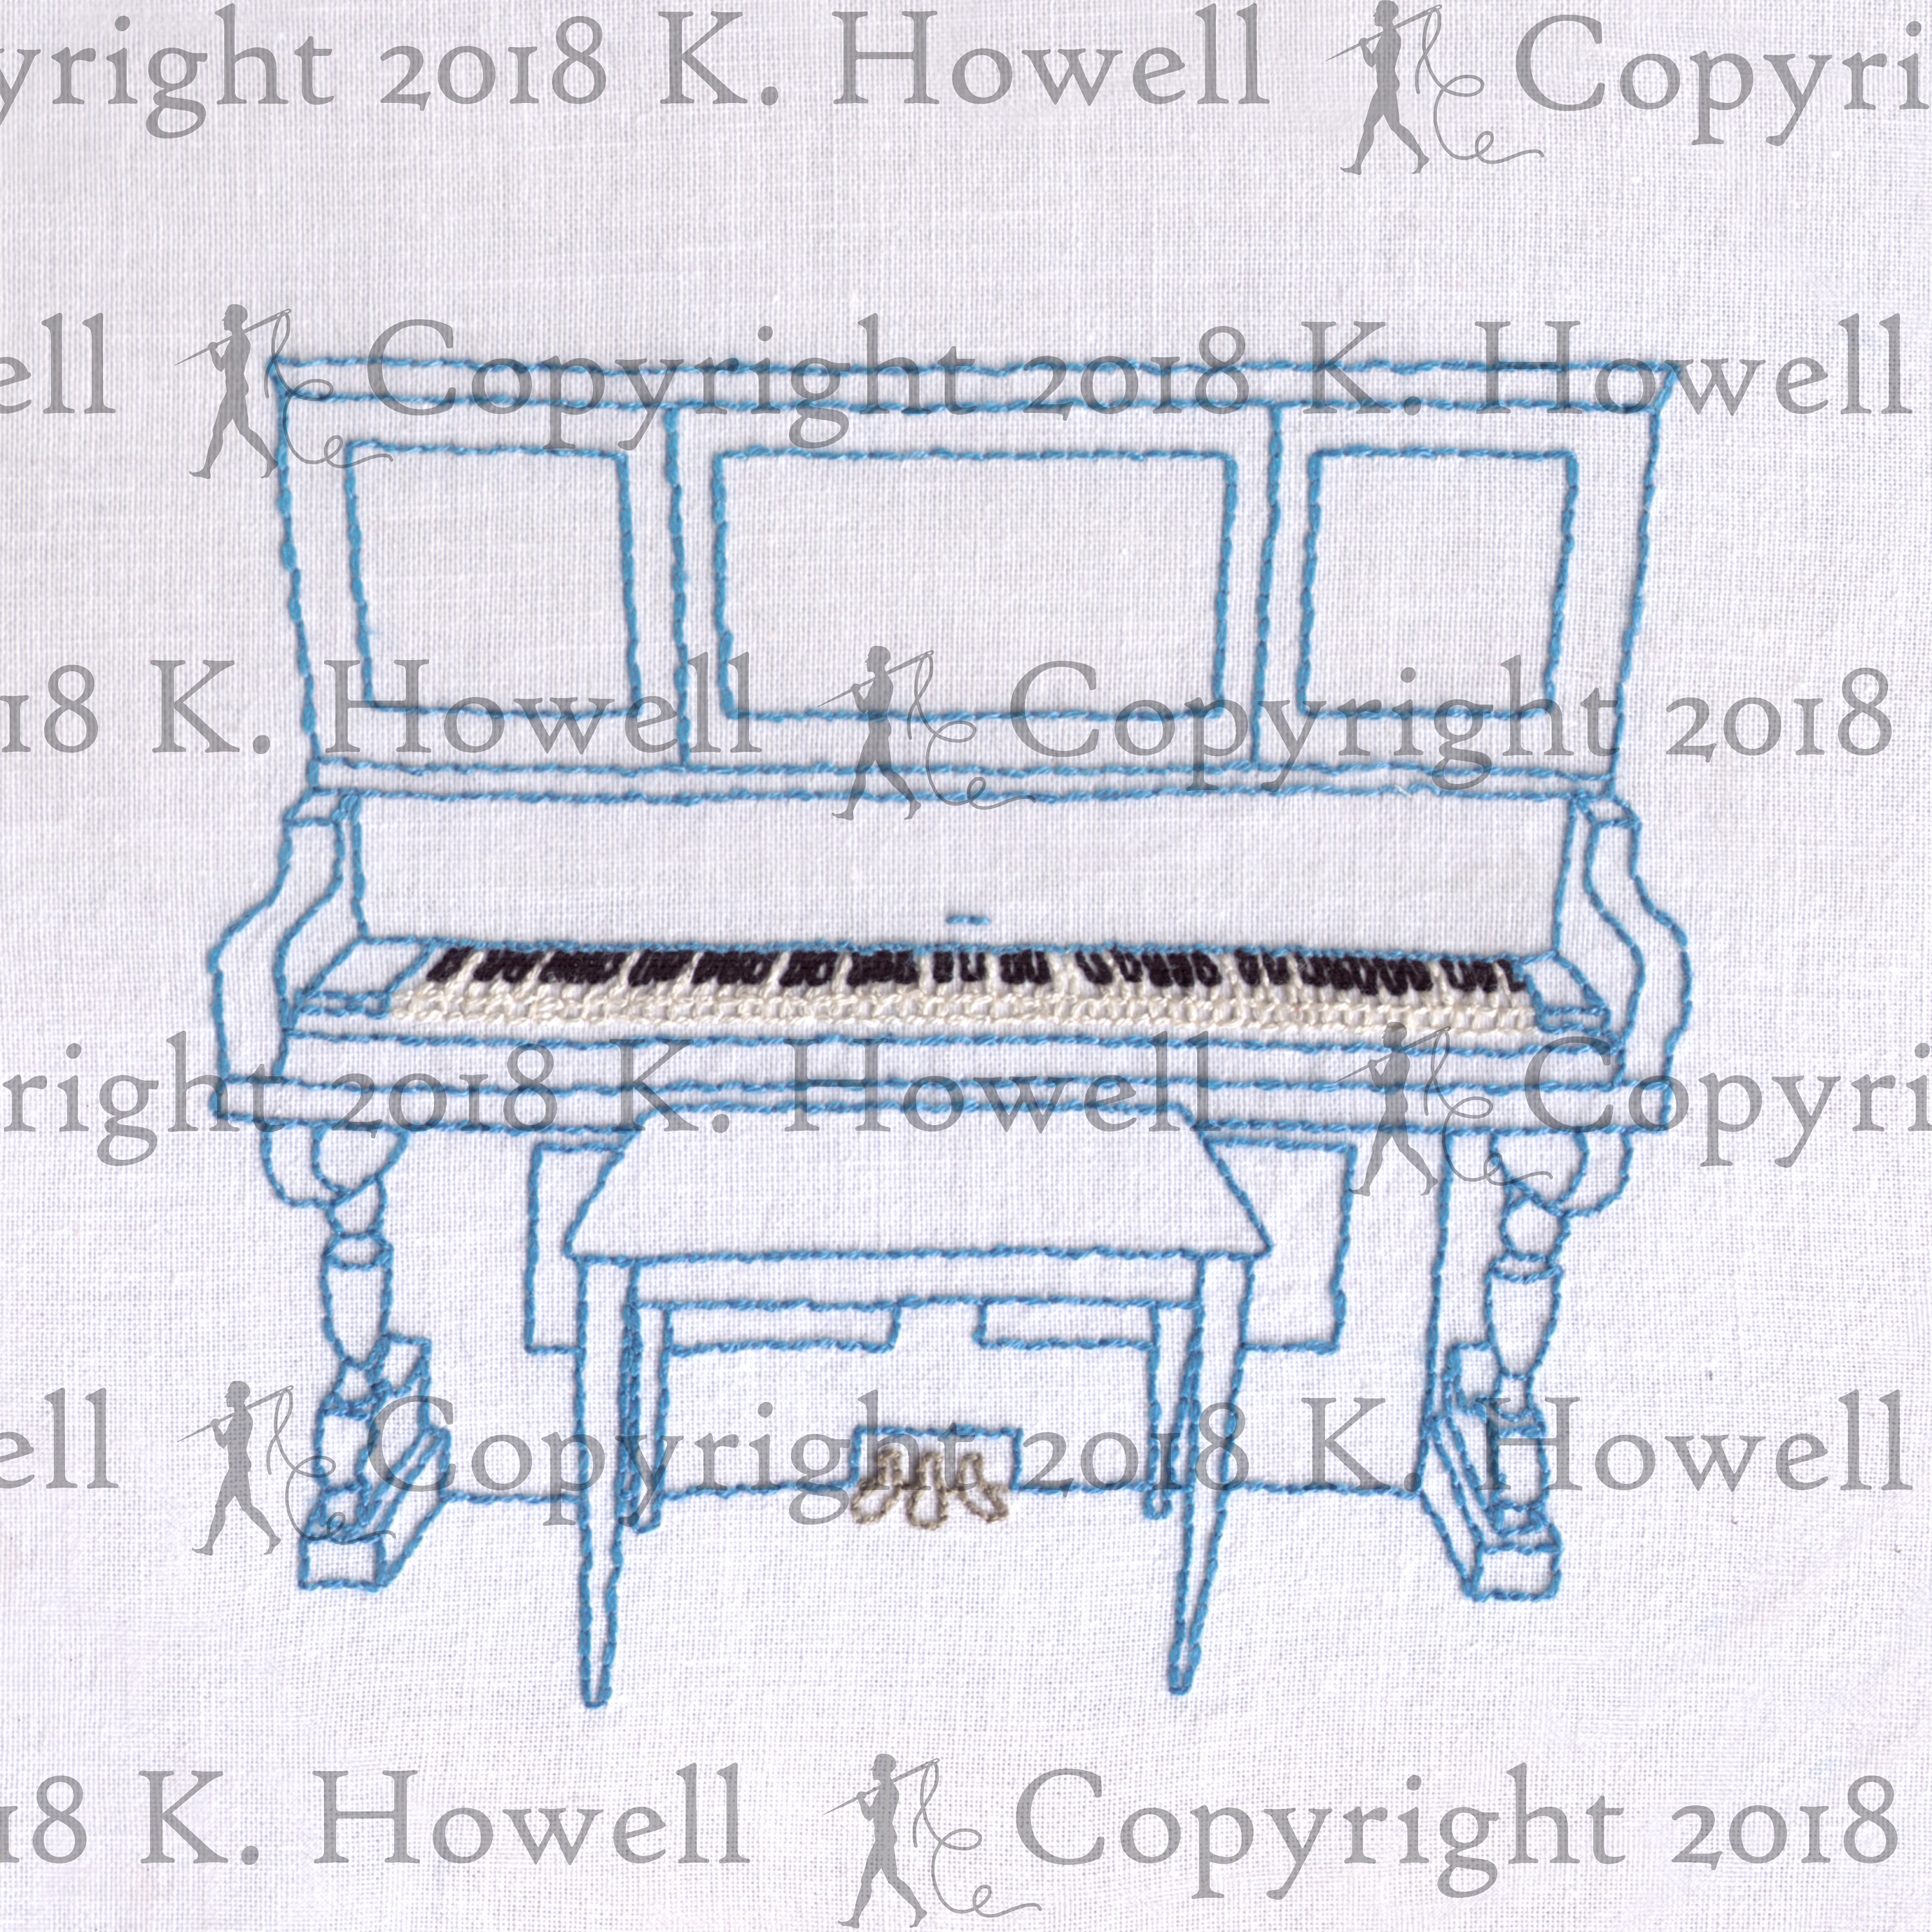 Image from page 12 of Square and upright pianos 1884  Flickr